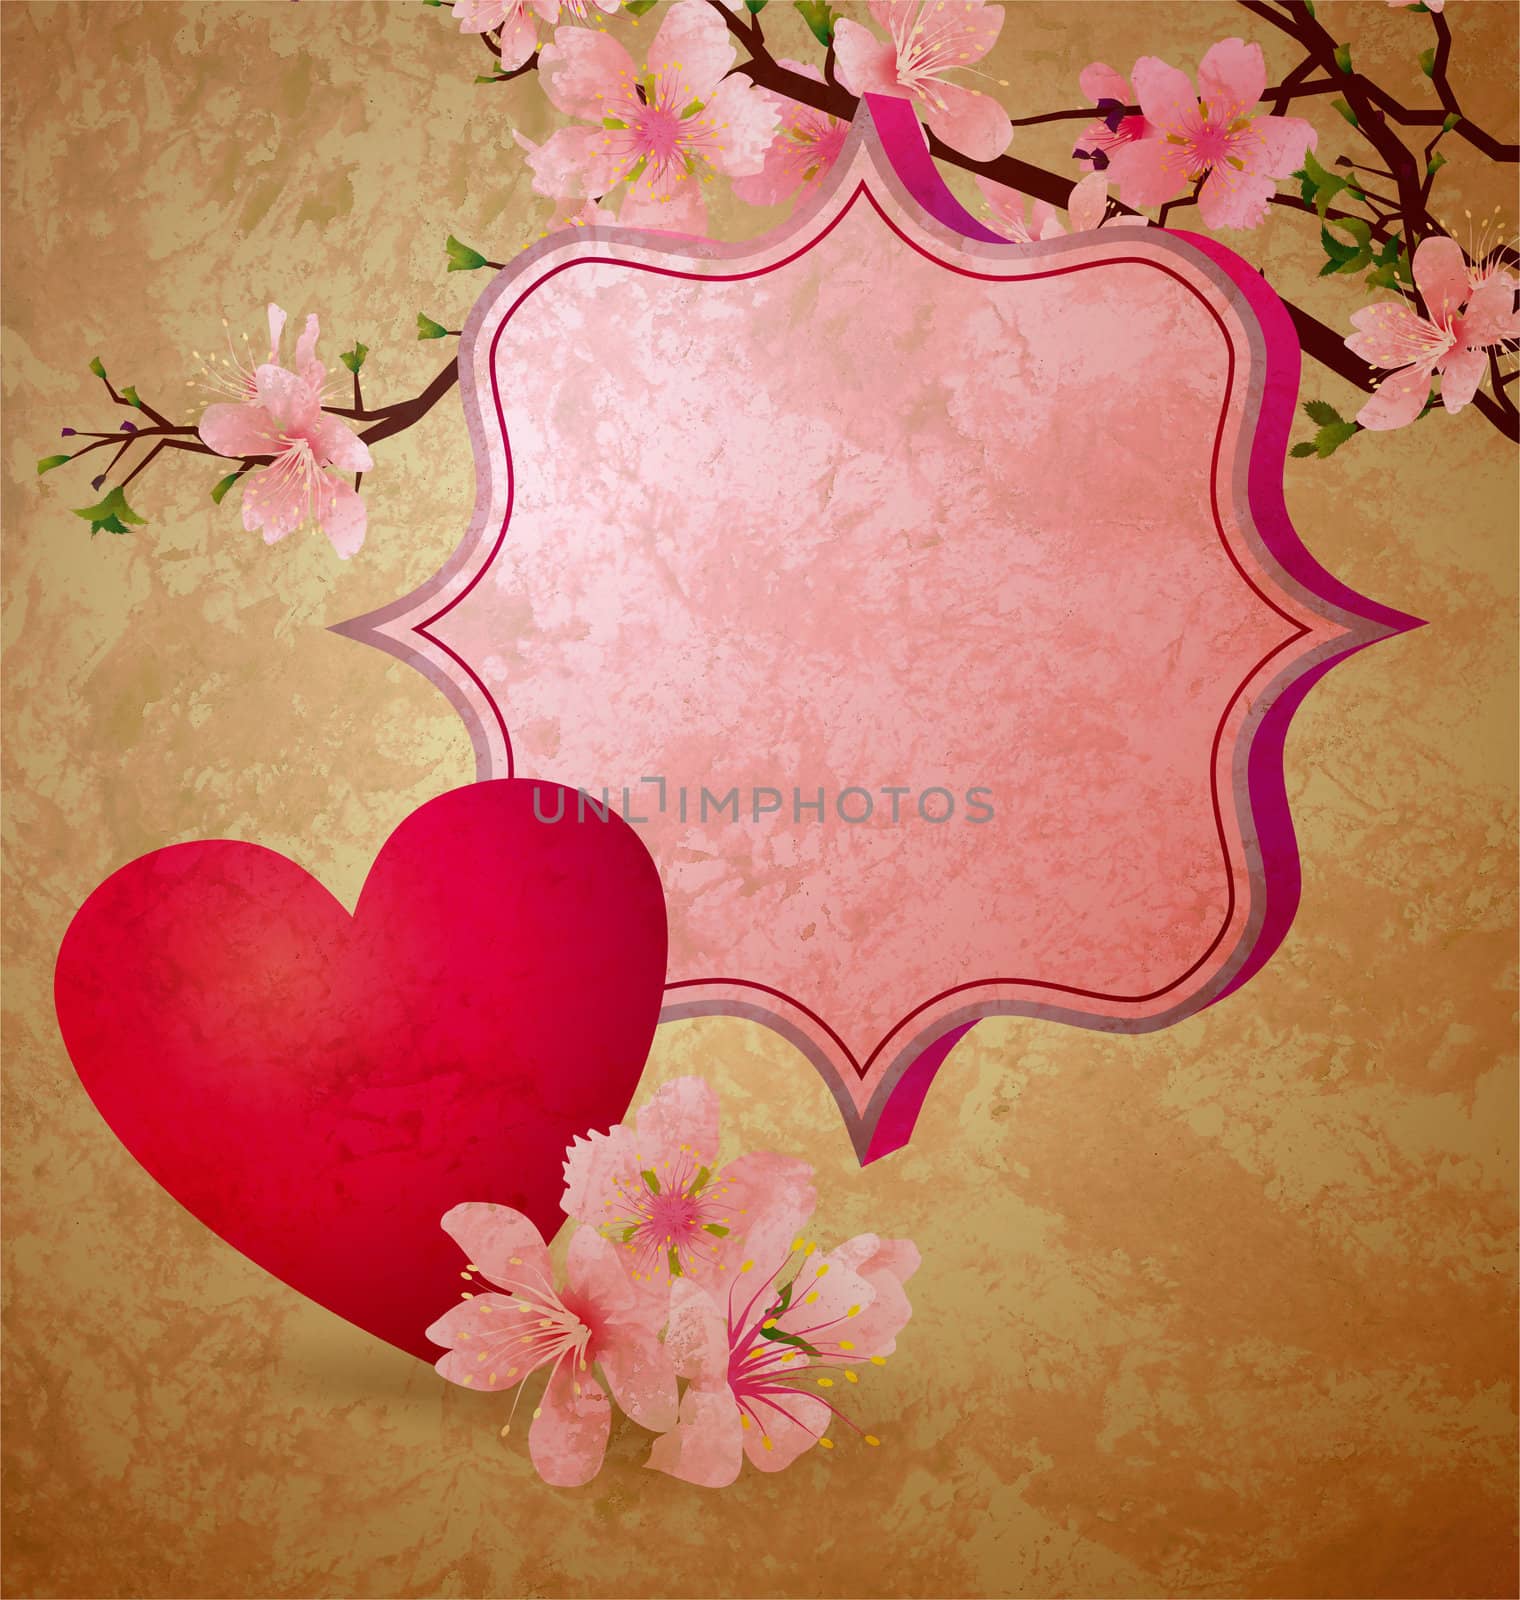 grunge illustration with blooming cherry tree and red heart valentine's day frame